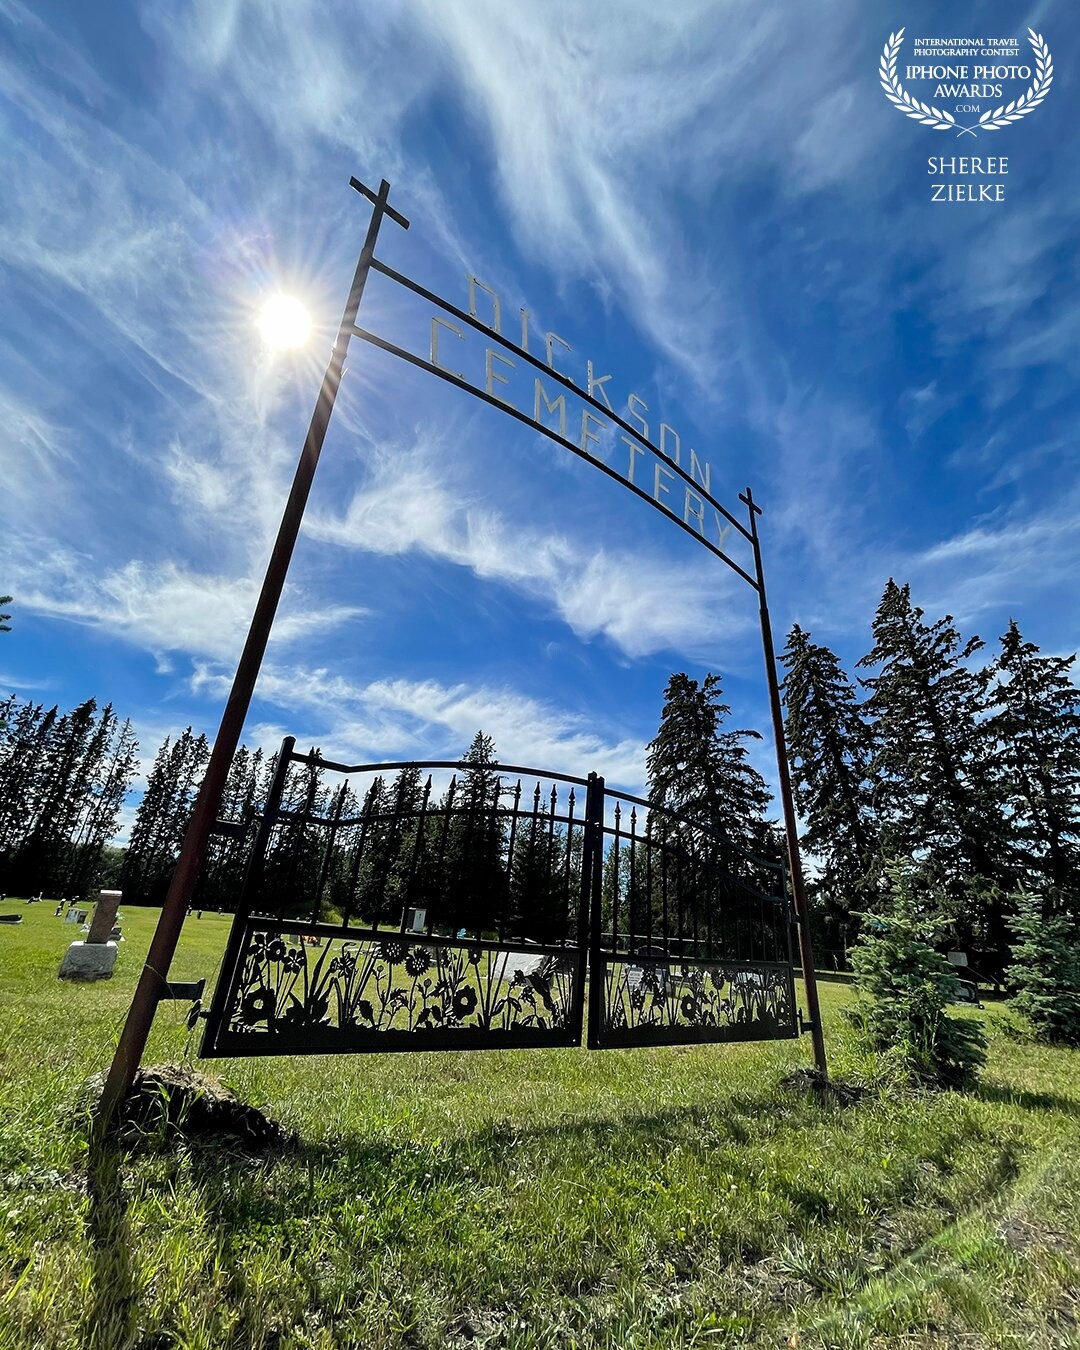 Three of my photo loves in one shot: a cemetery, a skewed view, and a sun star in a deep blue sky accented with wispy white clouds. Shot in Alberta, Canada.